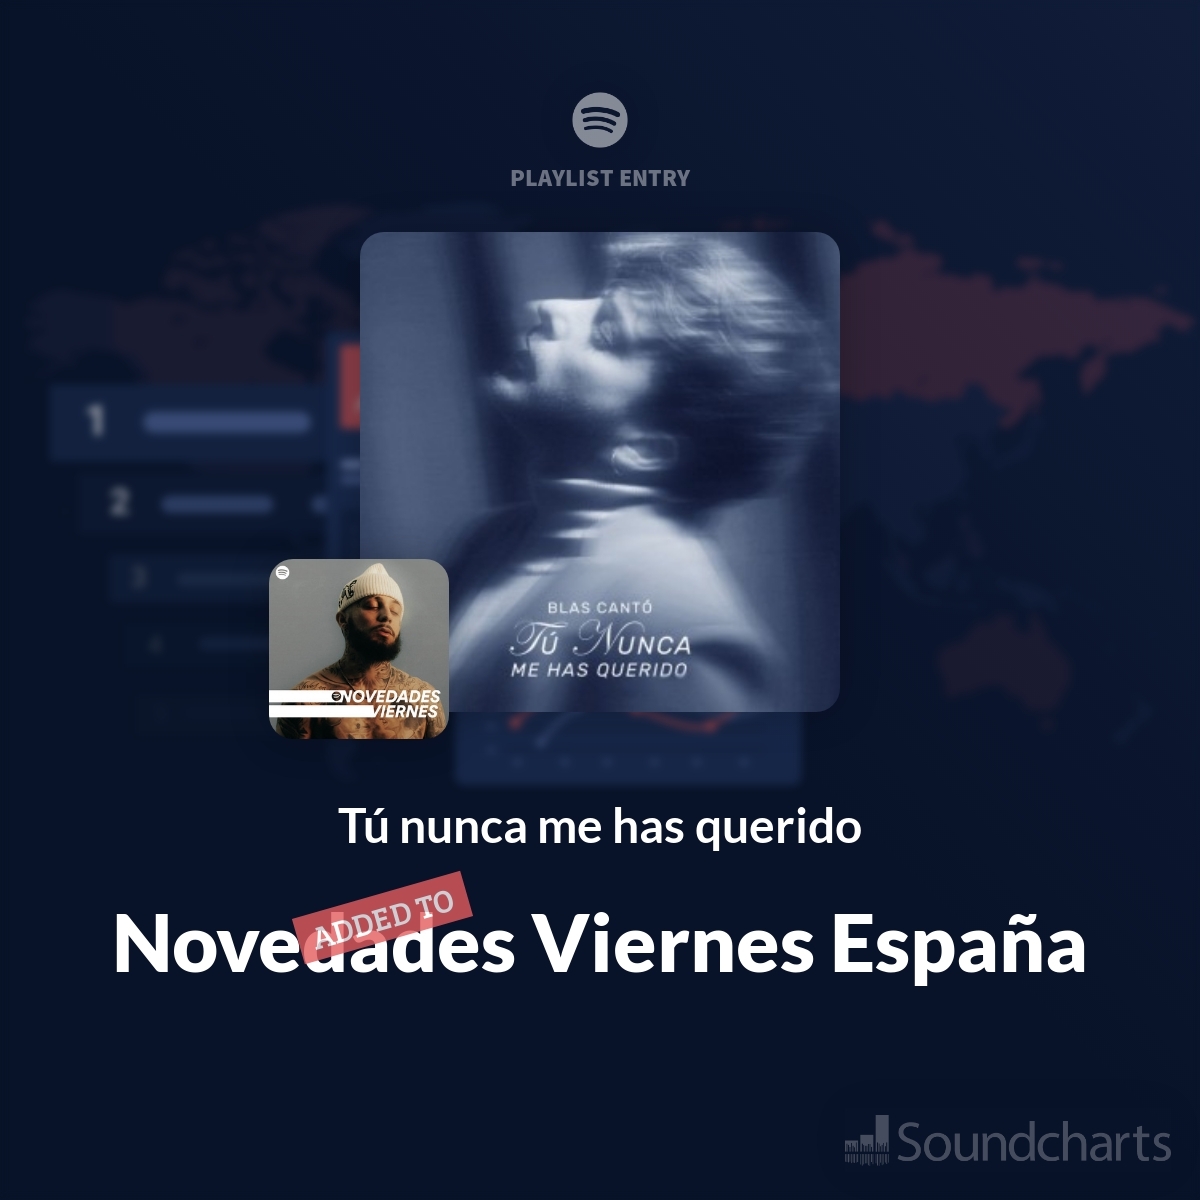 @BlasCanto 🔥 You're on fire! 'Tú nunca me has querido' is now being featured on 'Novedades Viernes España' playlist on Spotify. 🎧